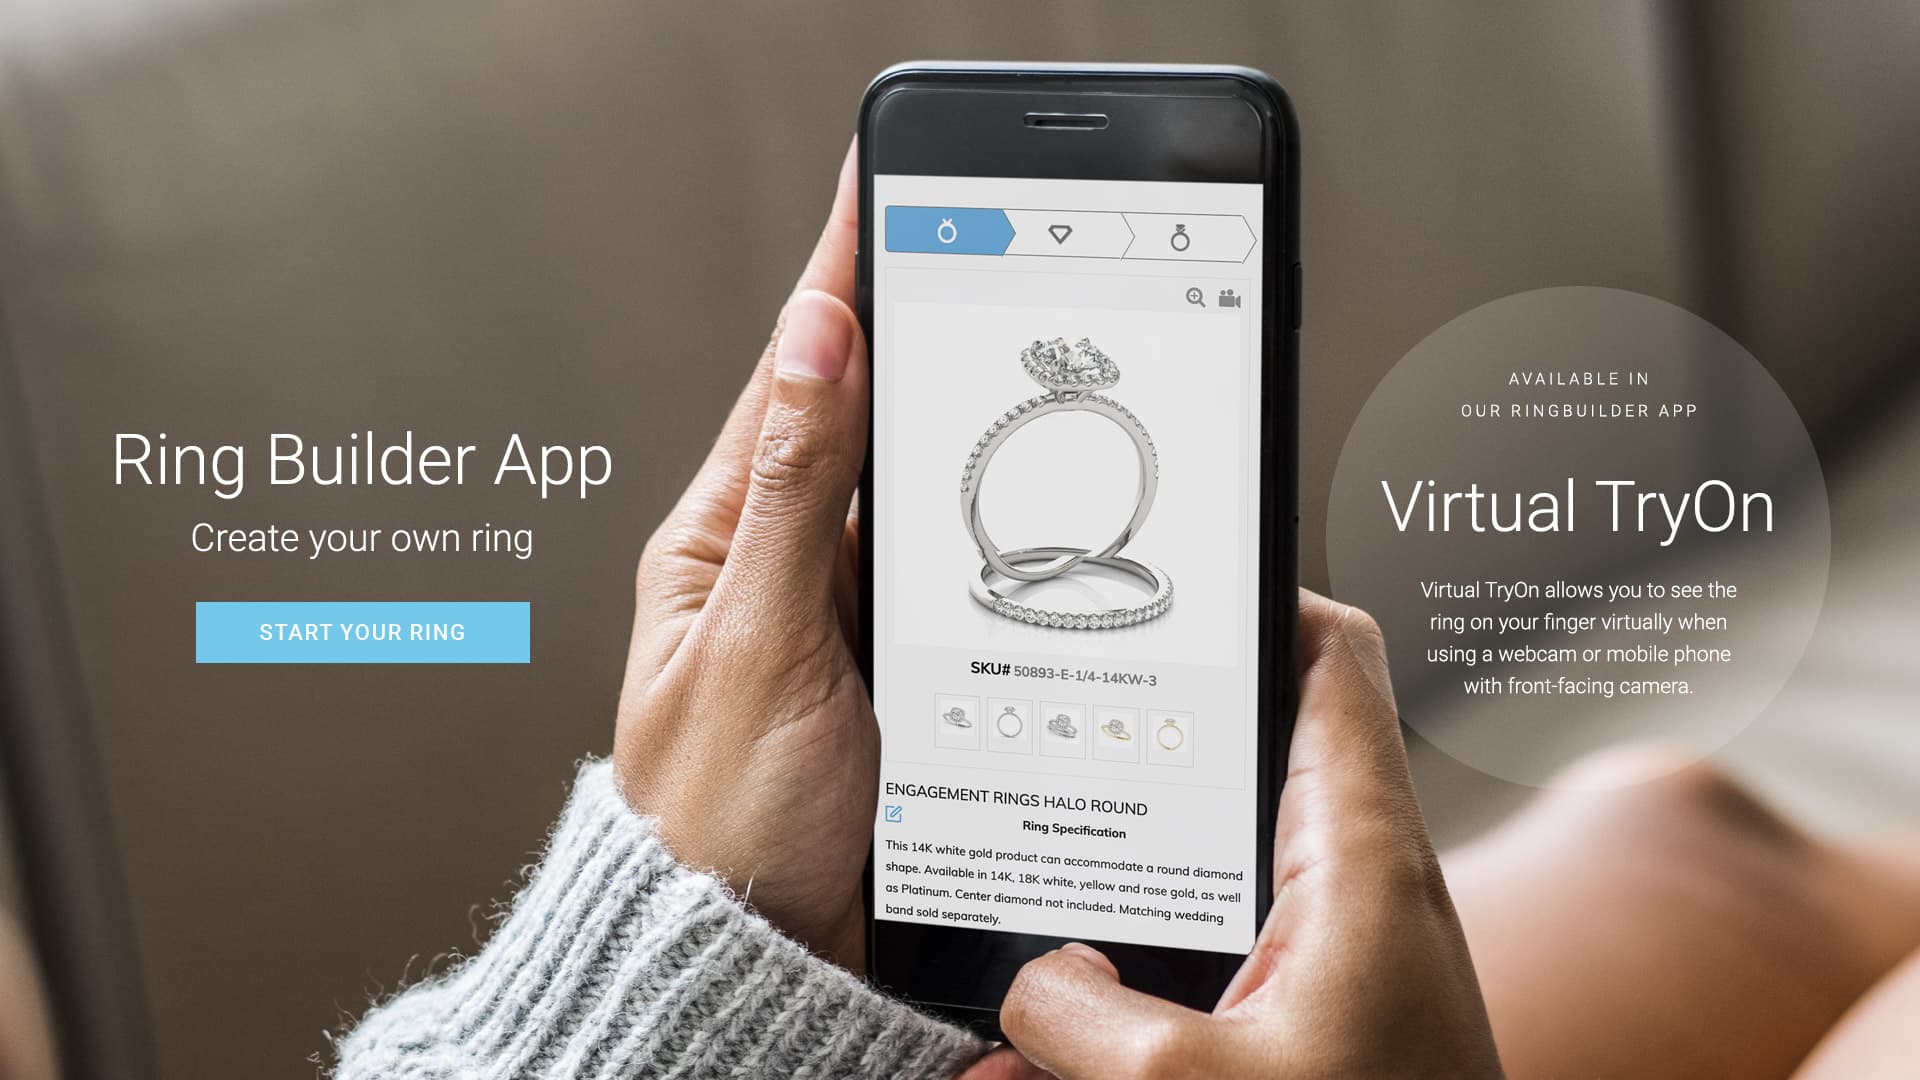 Ring builder app in Madison, WI